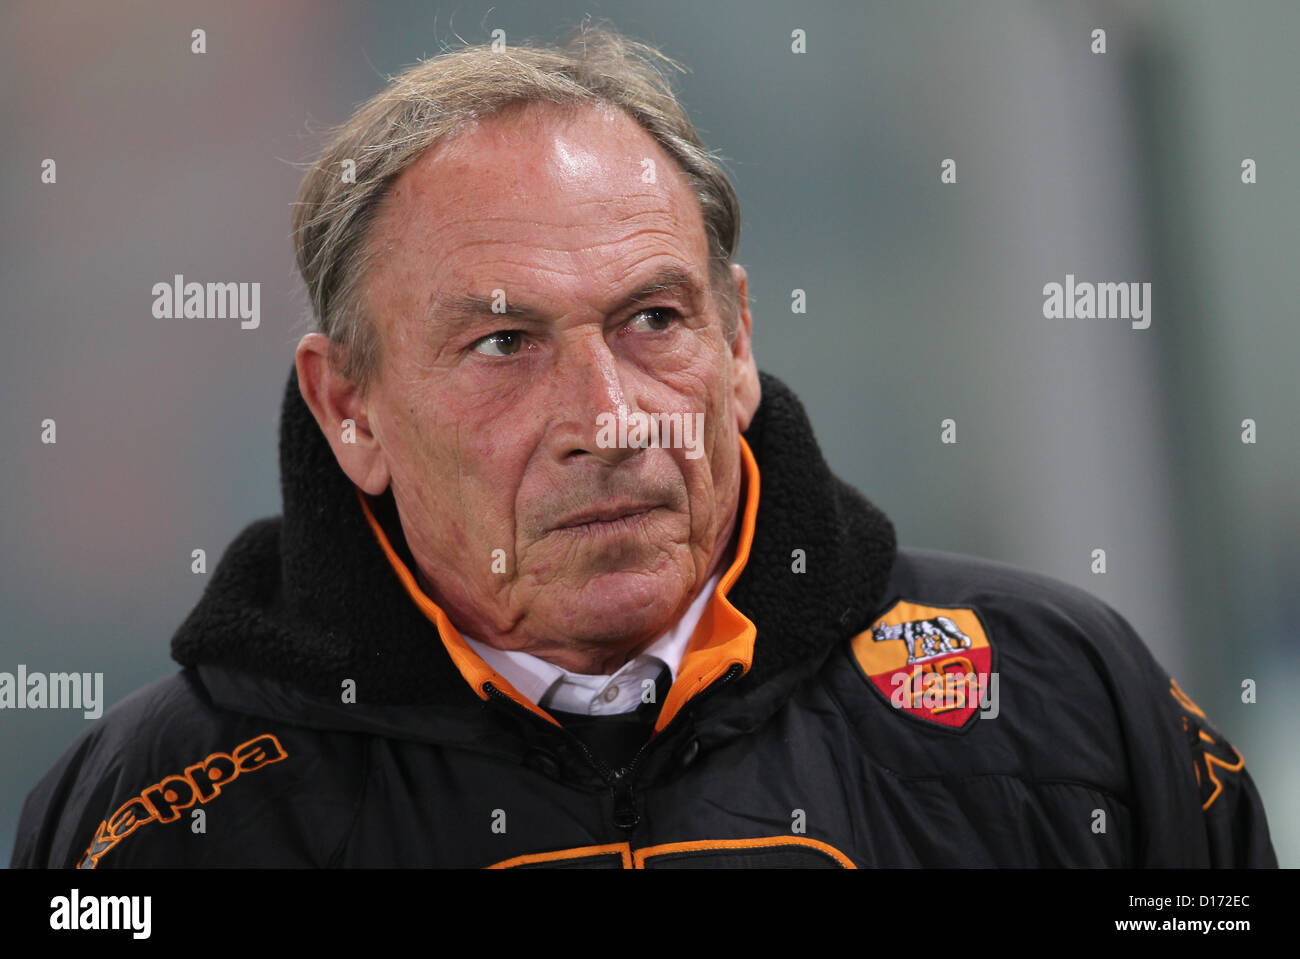 09.12.2012 Rome, Italy. Zeman team coach during the Italian League game between Roma and Fiorentina from the Stadio Olimpico. Stock Photo